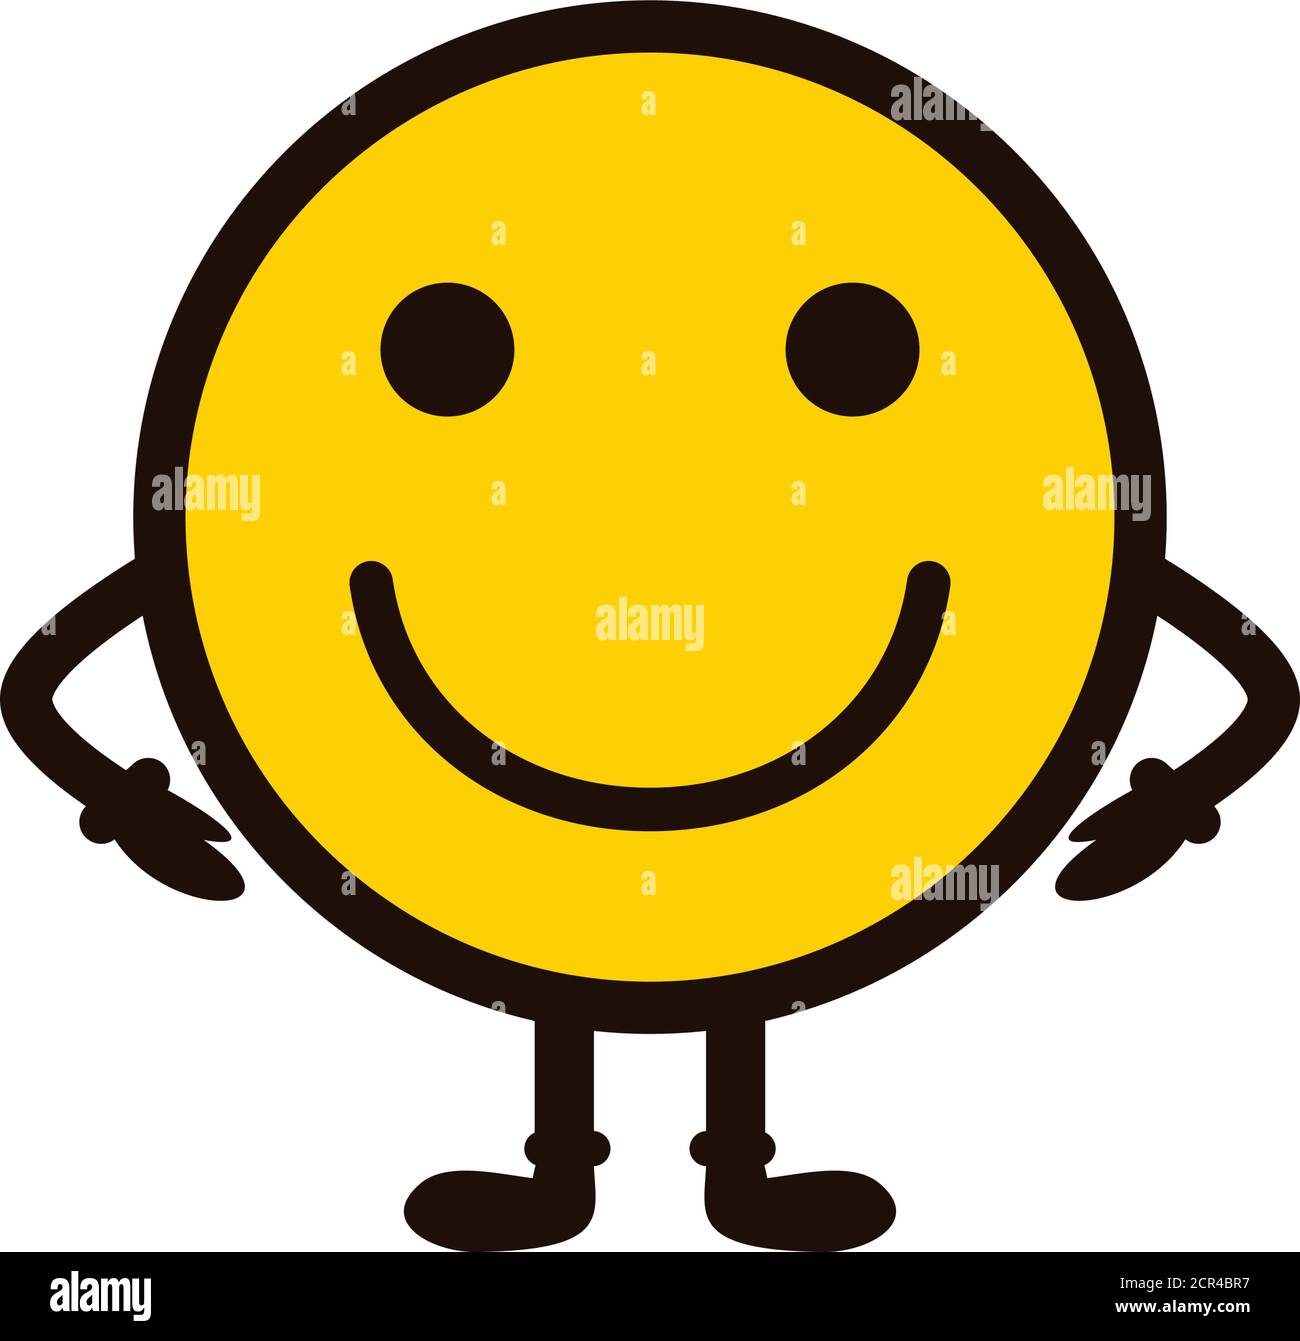 smile icon. Happy smiley face with arms and legs. Smiling Emoticon. Yellow vector symbol. Stock Vector